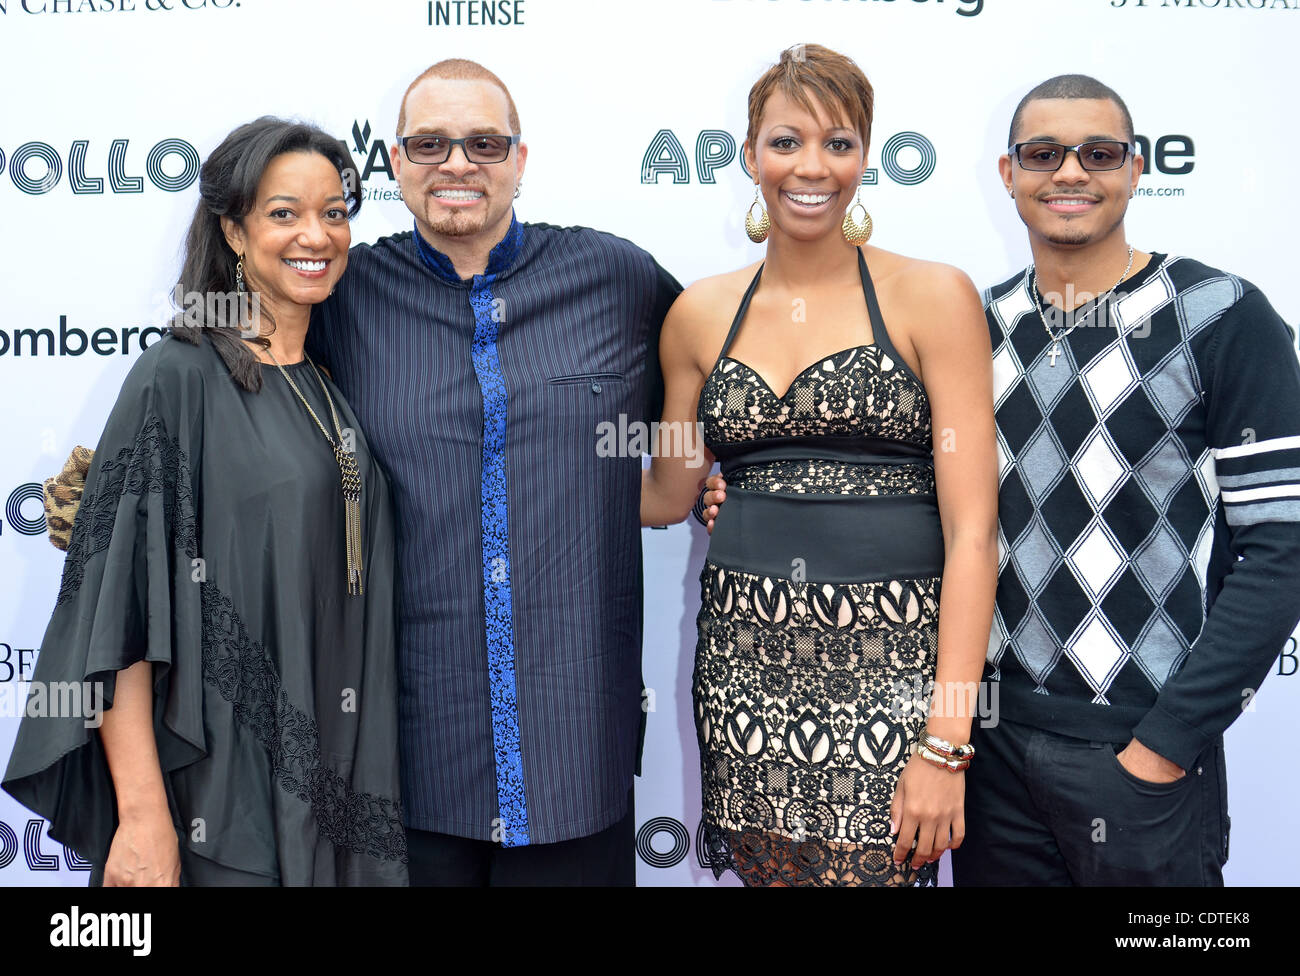 June 13, 2011 - New York, New York, USA - Comedian SINBAD and family, wife, MEREDITH ADKINS, daughter, PAIGE ADKINS, and son, ROYCE ADKINS arriving at the Apollo Spring Gala in honor of Stevie Wonder. The Apollo Theater Foundation inducted Mr. Wonder in to the Apollo Hall of Fame. (Credit Image: © R Stock Photo